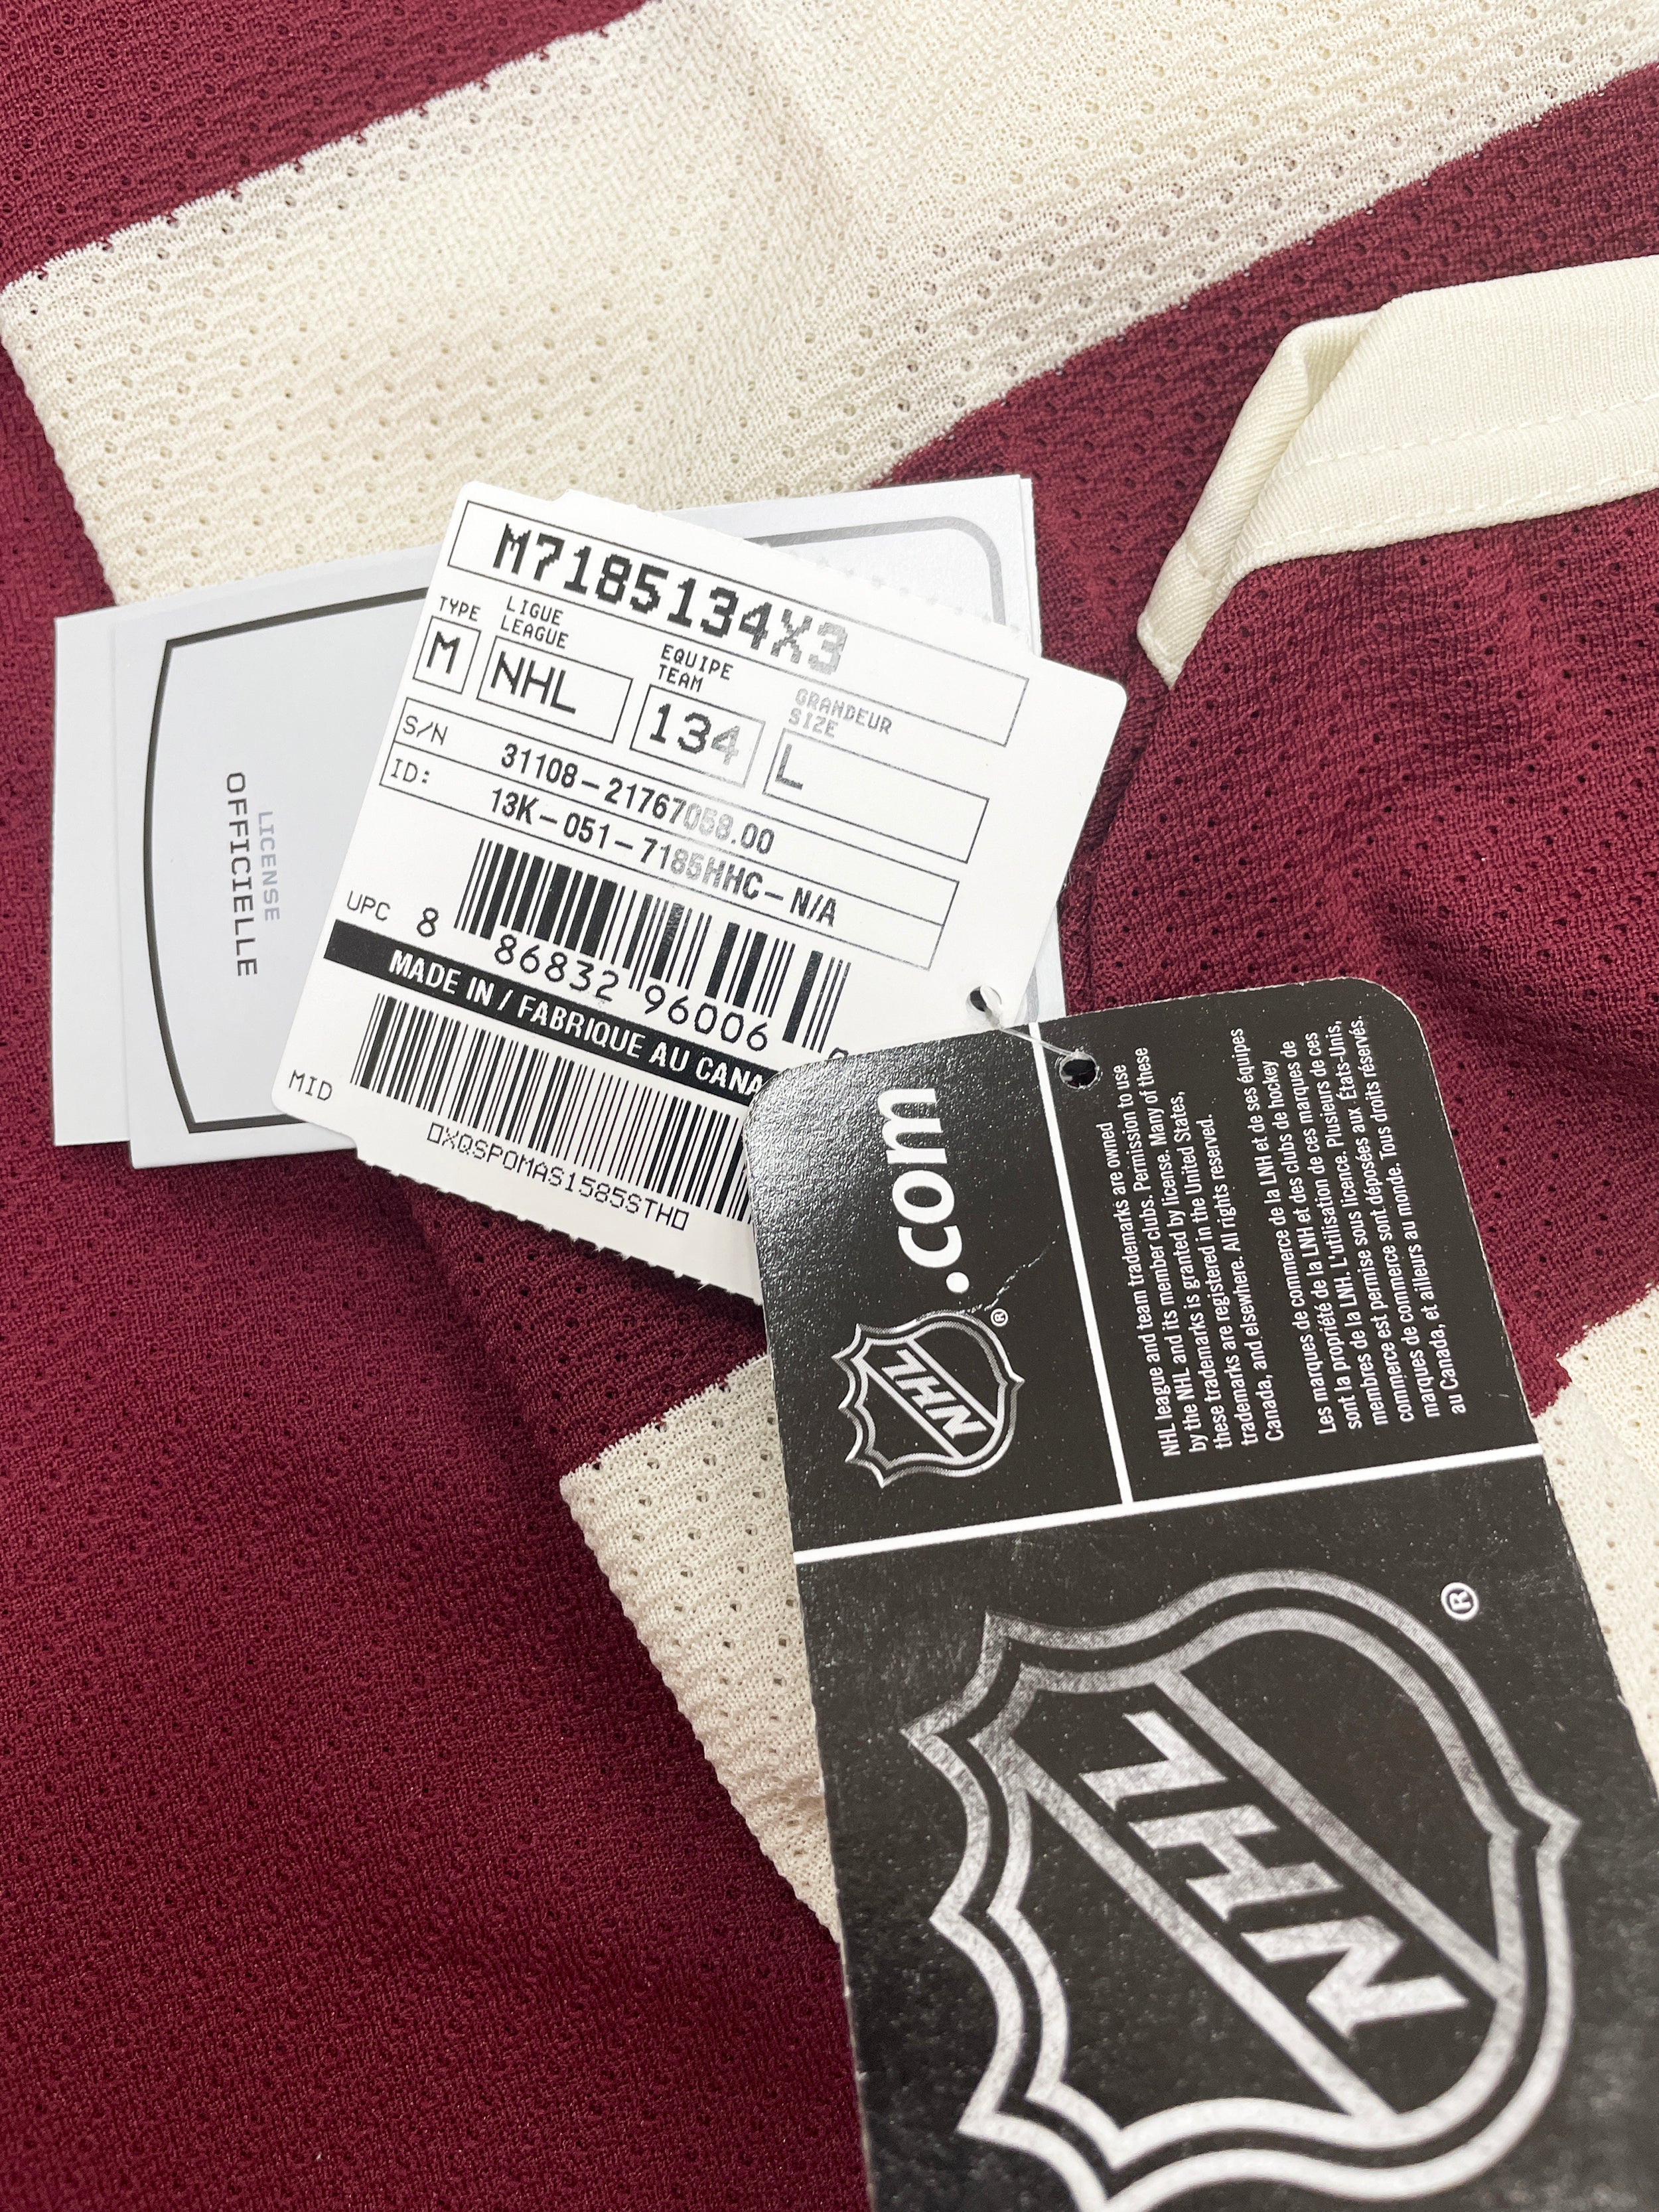 2014 Heritage Classic Jerseys Vancouver Canucks 22 Daniel Sedin Winter  100th Claret Red Ice Hockey Jersey Millionaires V Patch From Since, $30.97